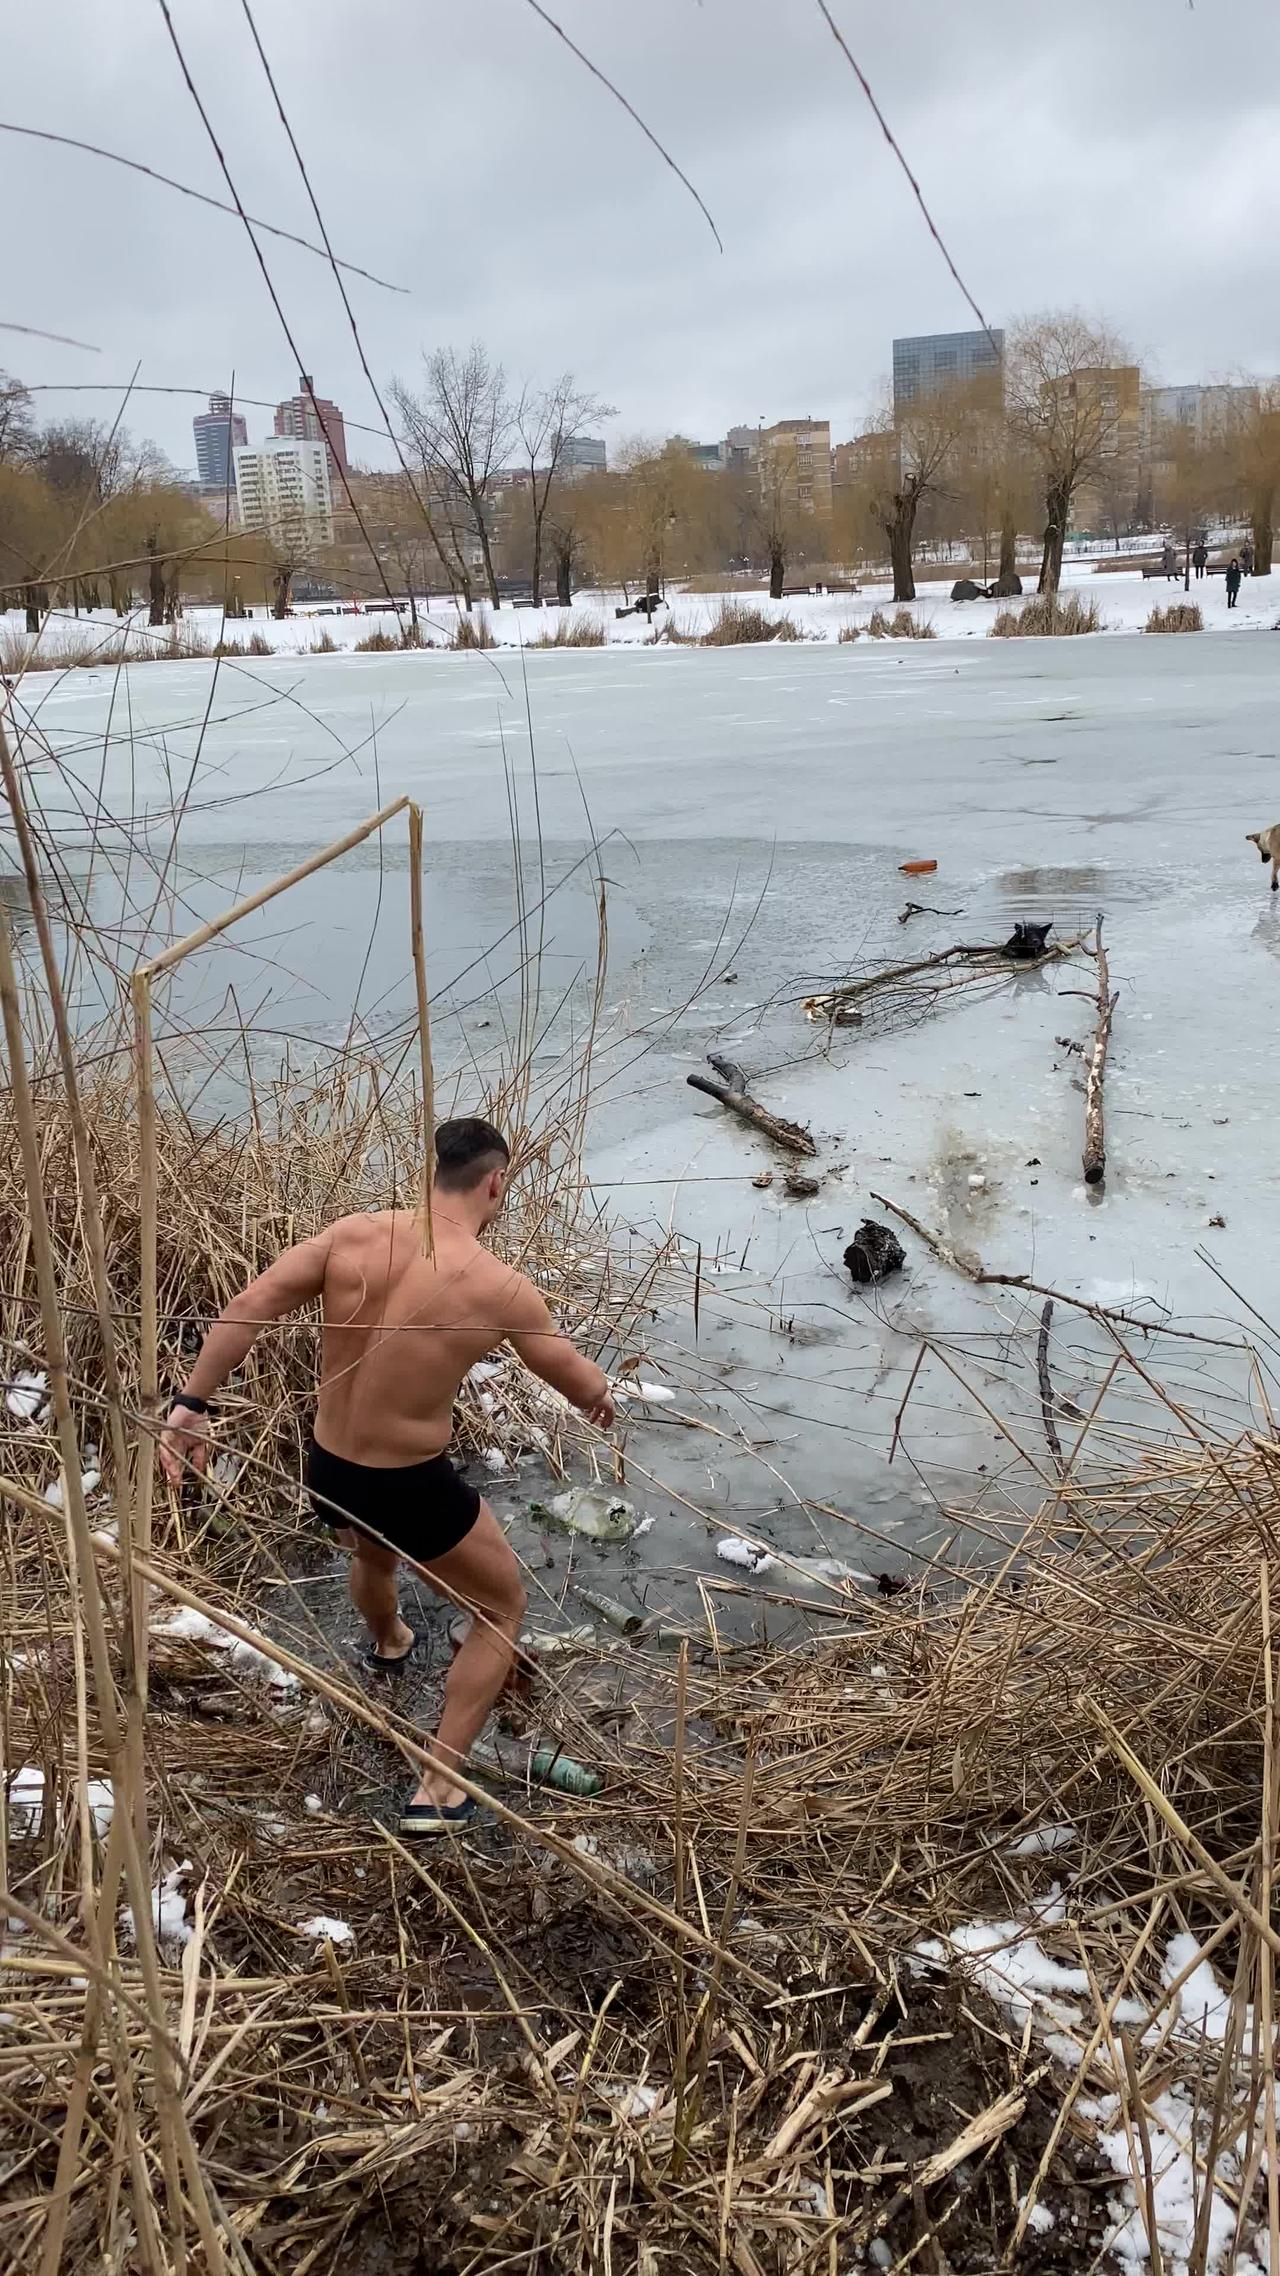 Brave Bystander Rescues Dog From Frozen River - One News Page VIDEO